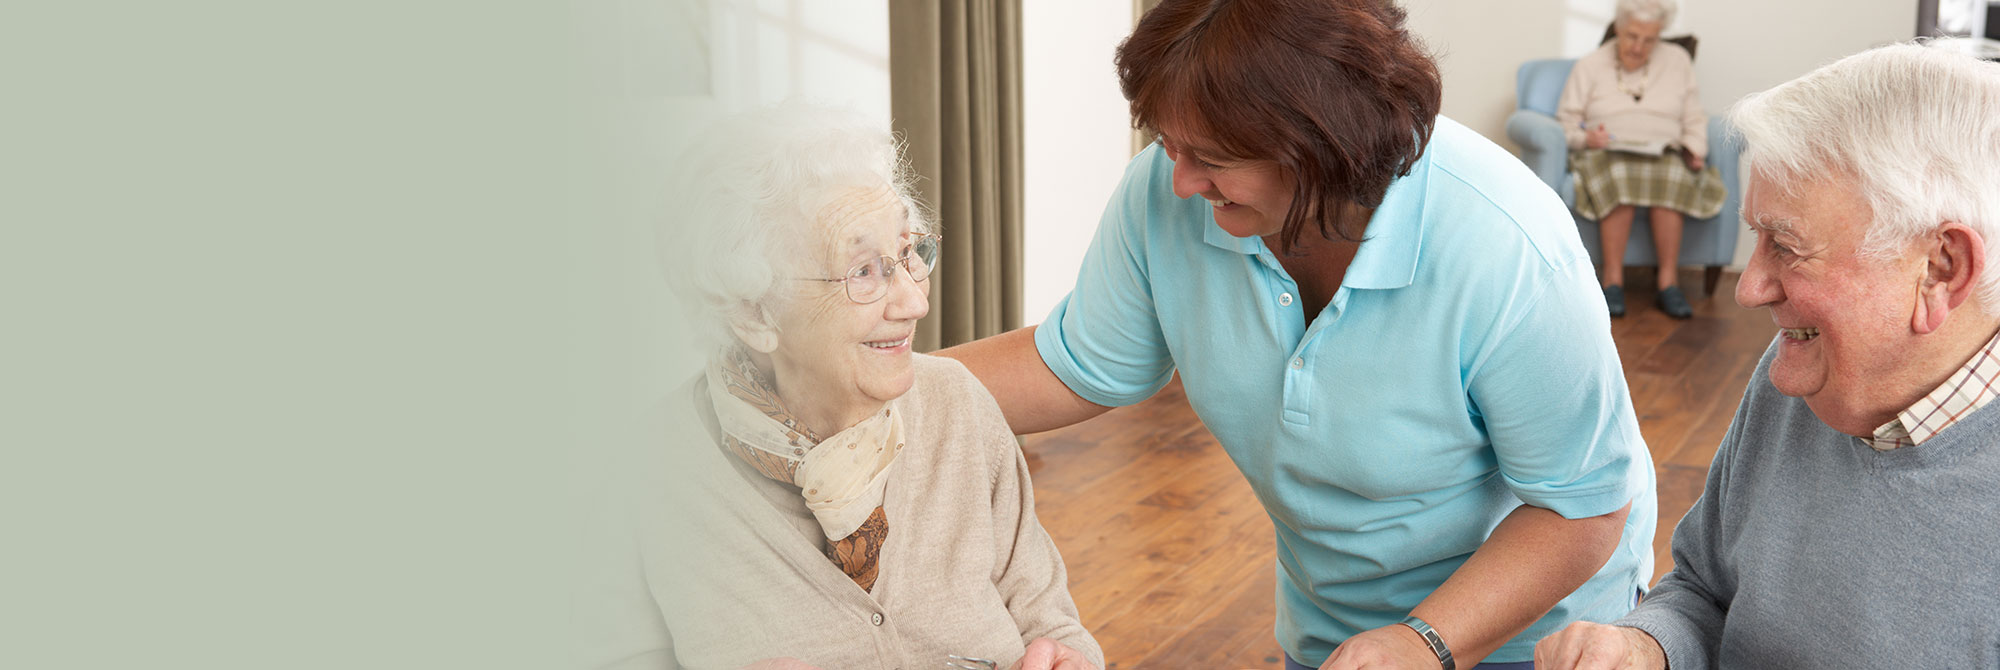 Elderly Couple Consulting with Nurse